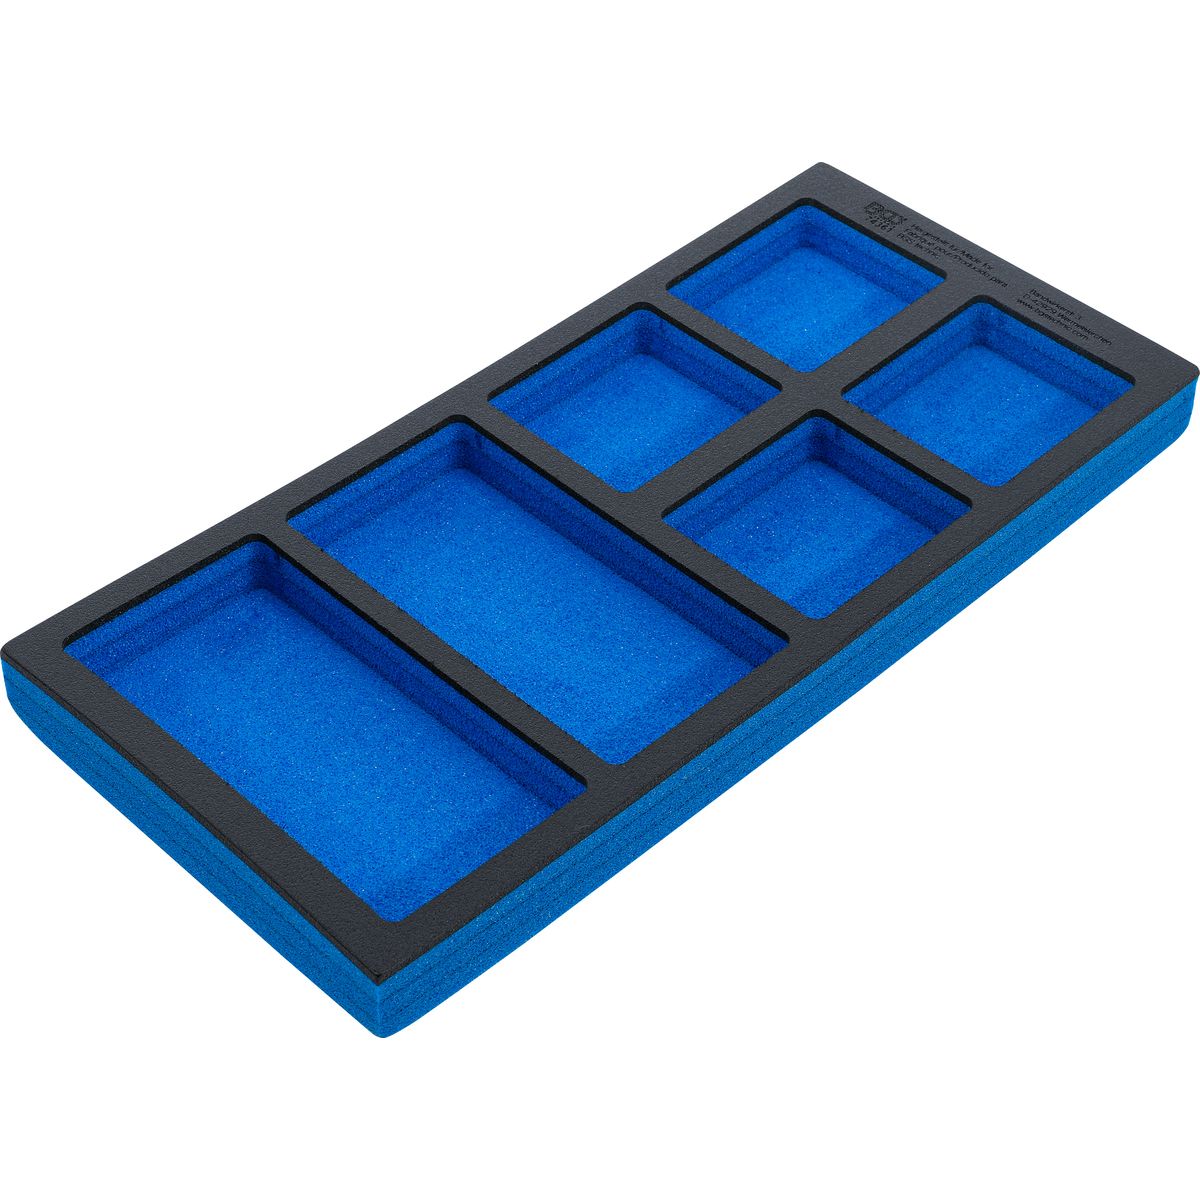 Tool Tray 1/3, empty: 6 Storage Compartments | 408 x 189 x 32 mm